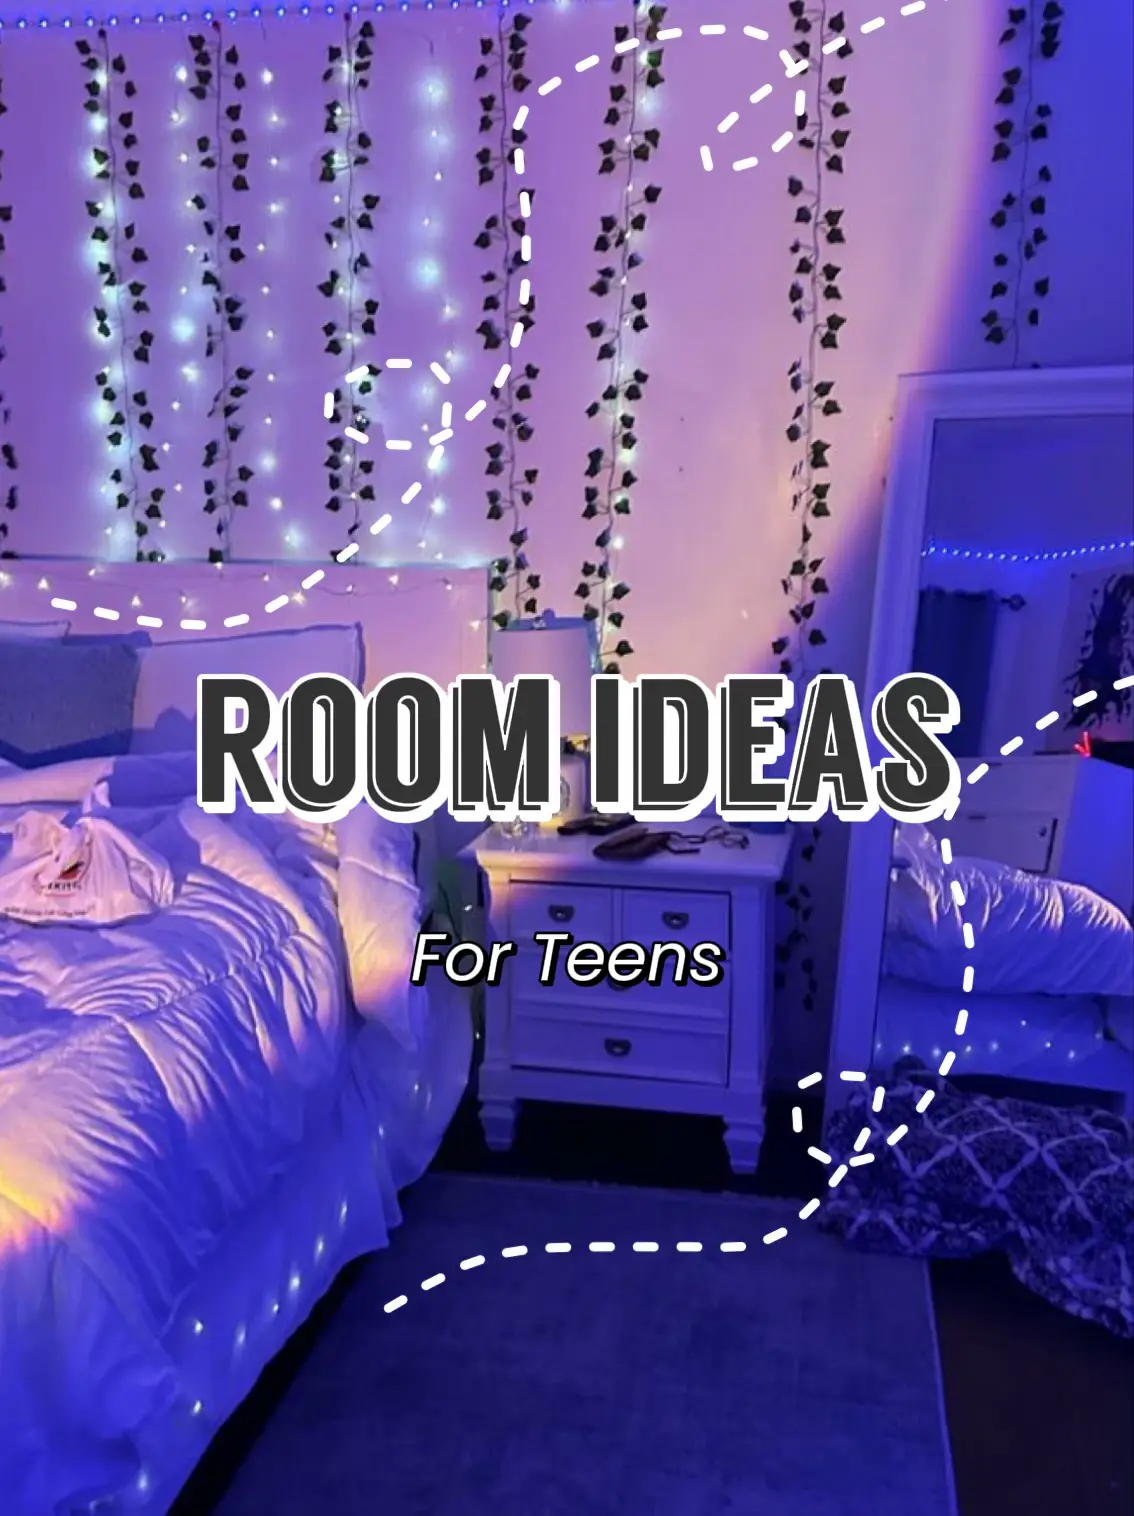 Sweet ideas for girls room - Ideas to earn money with Crafts - Room decor  #Diy 